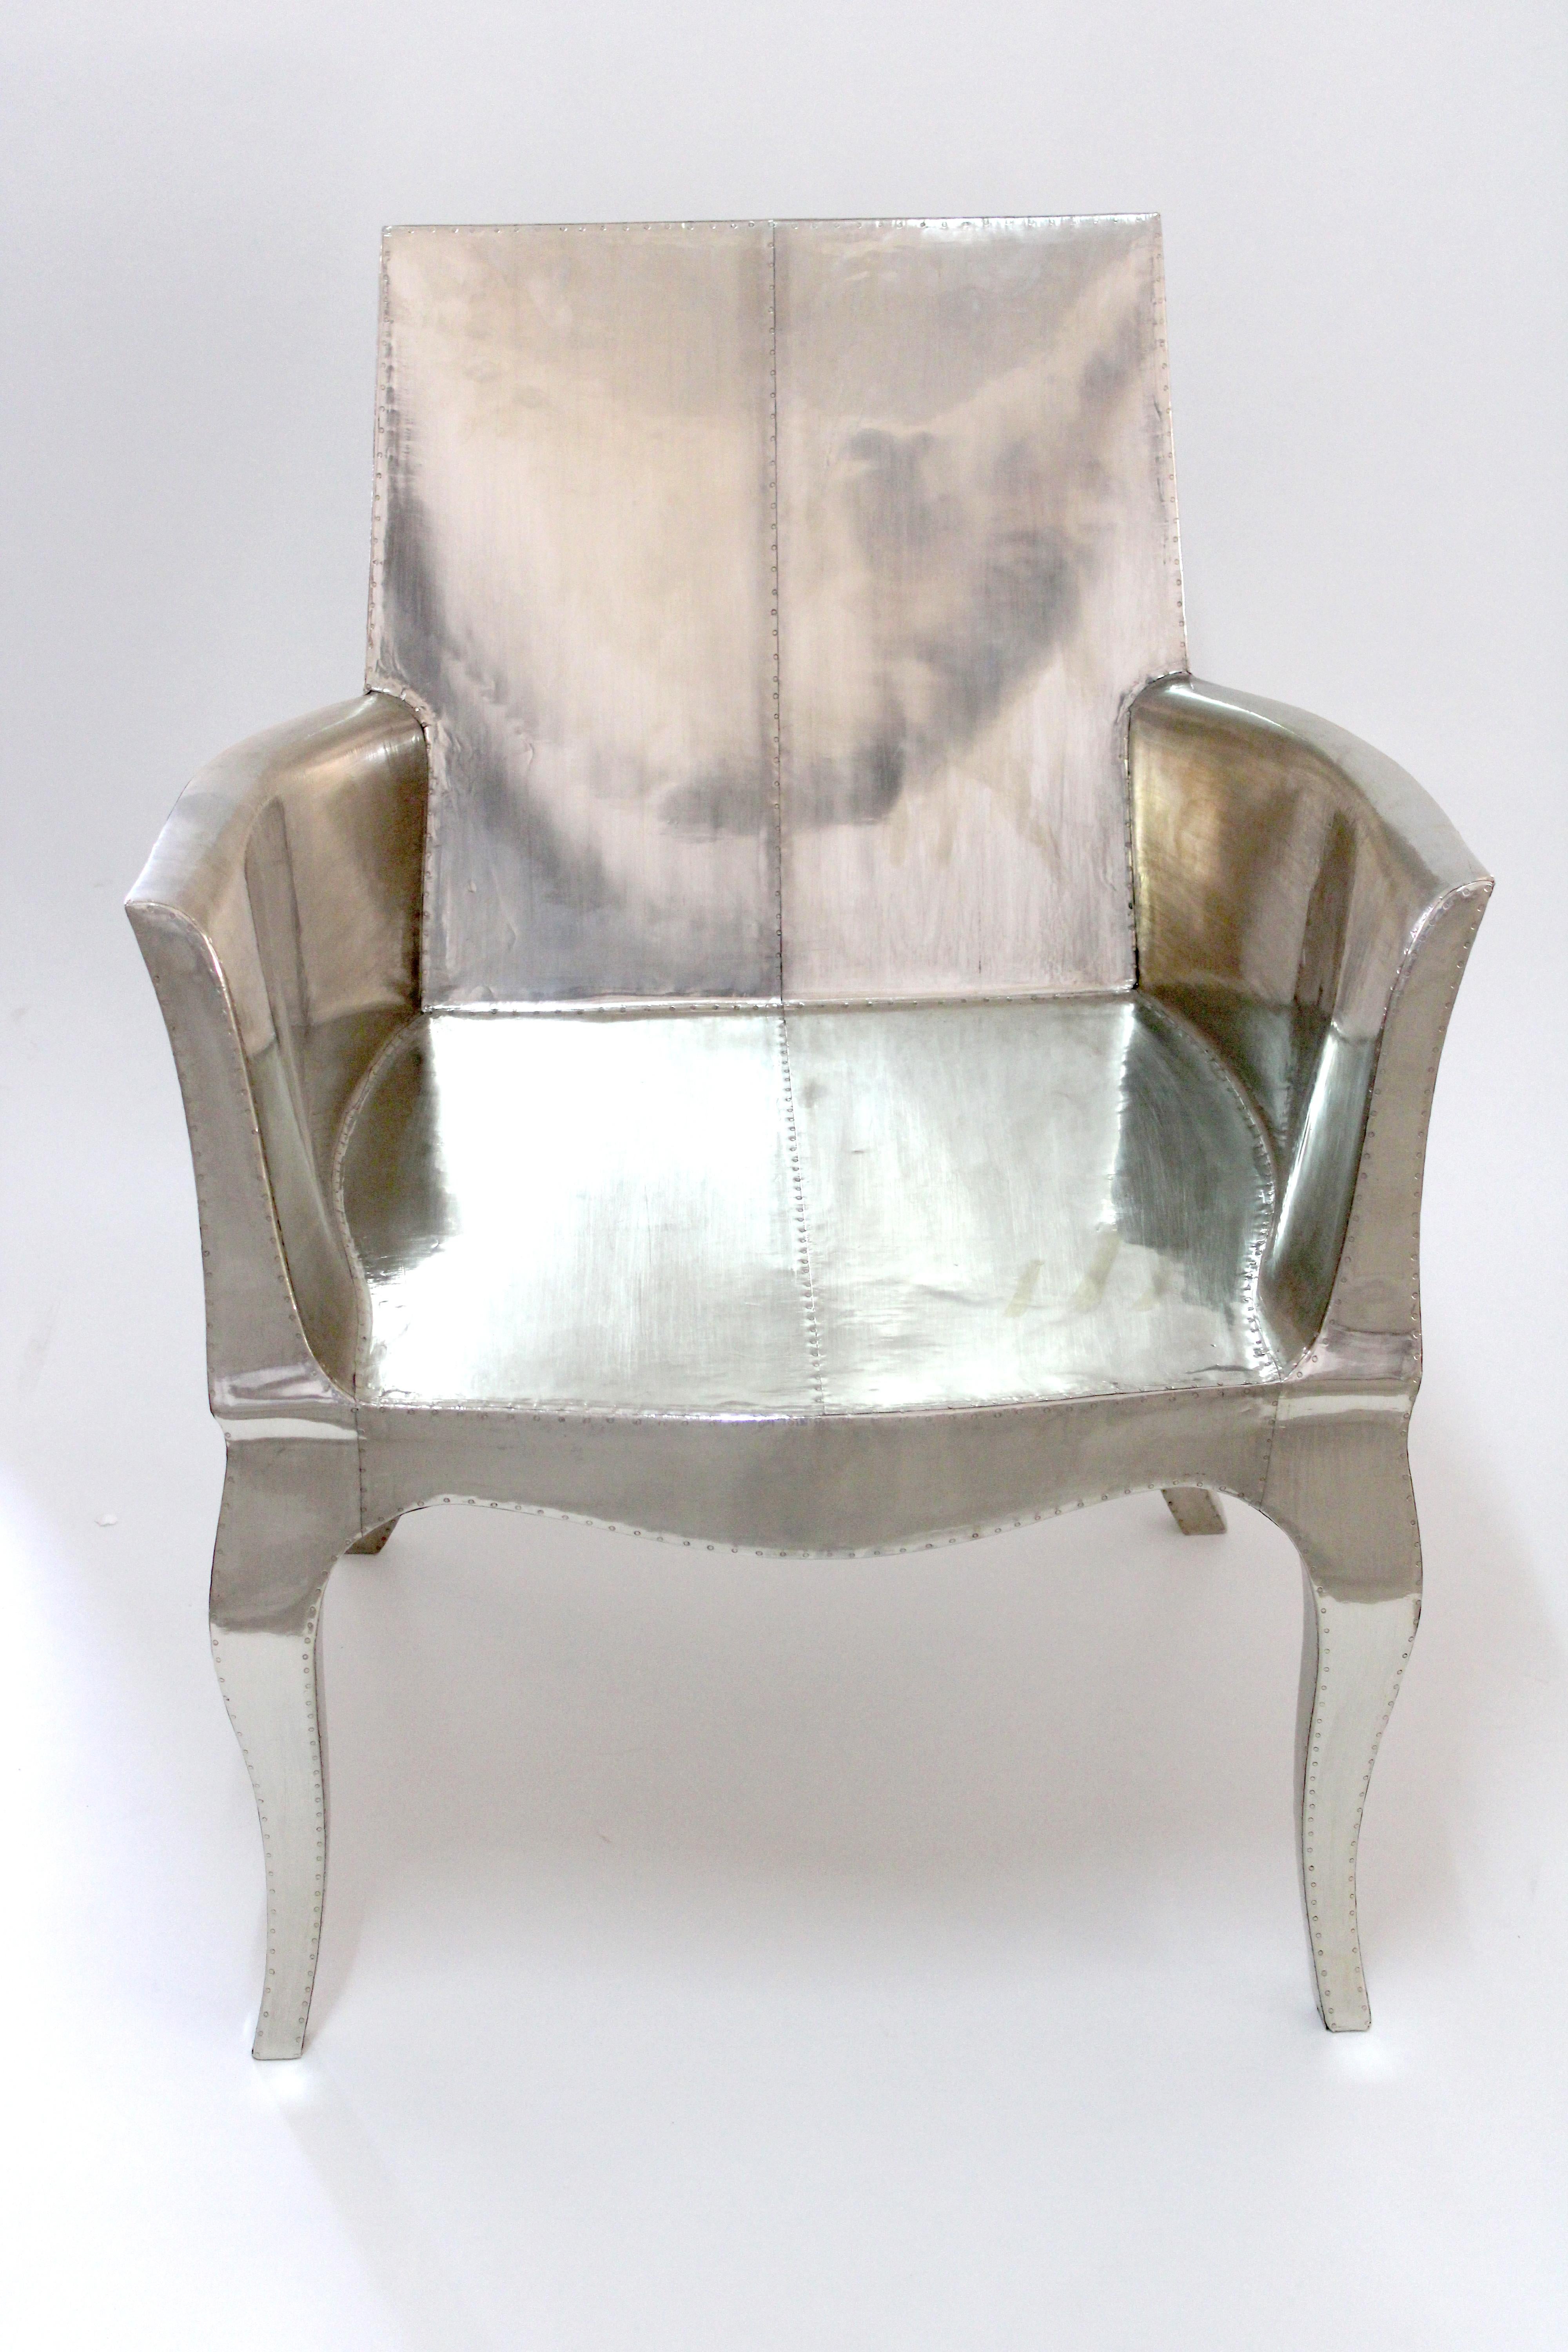 Contemporary Art Deco Chairs Pair Designed by Paul Mathieu for Stephanie Odegard For Sale